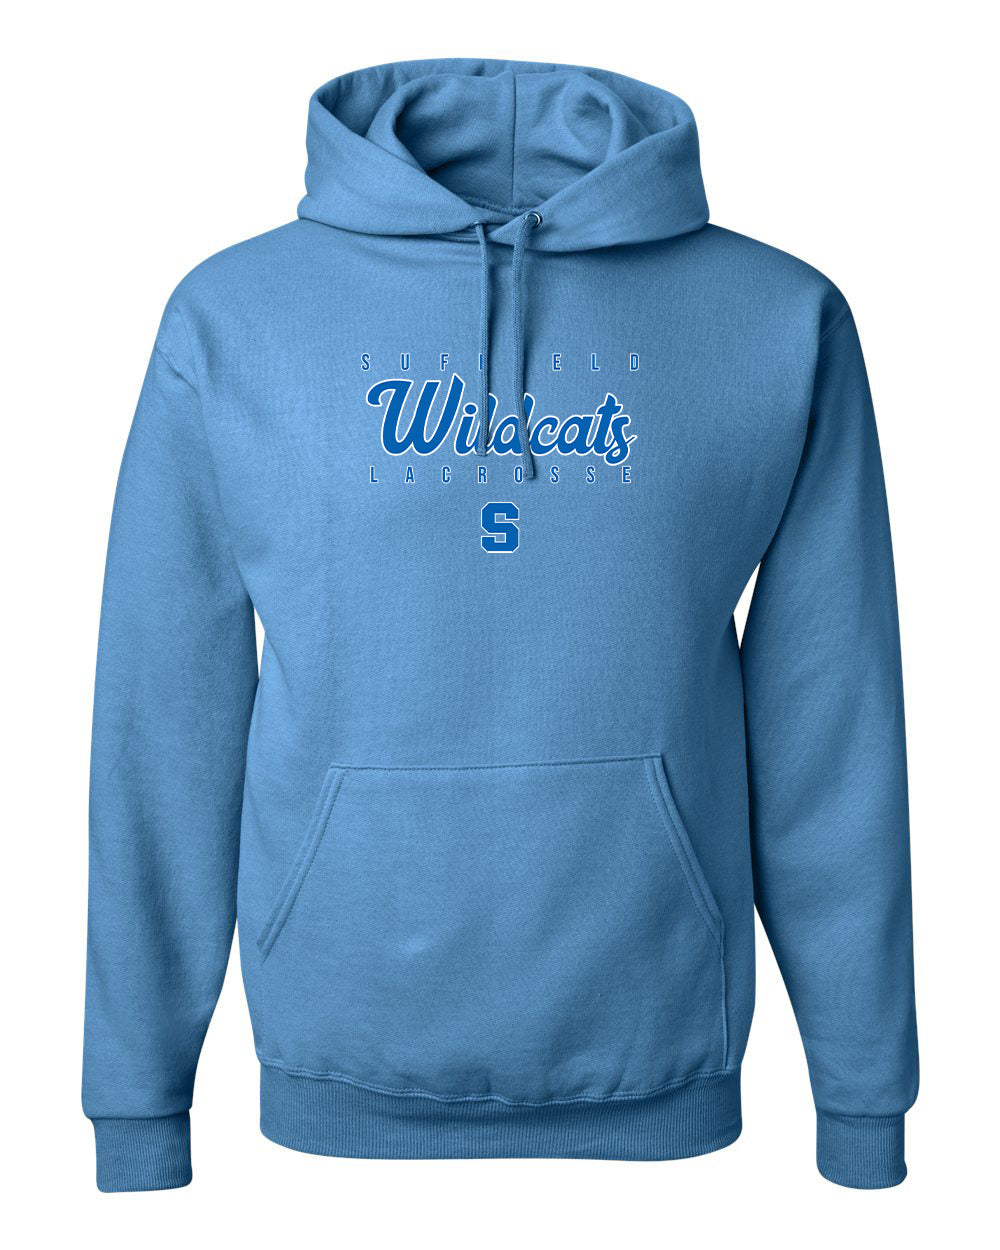 Suffield High Lacrosse - Adult Fleece Hoodie "SHL" - 996MR (color options available)